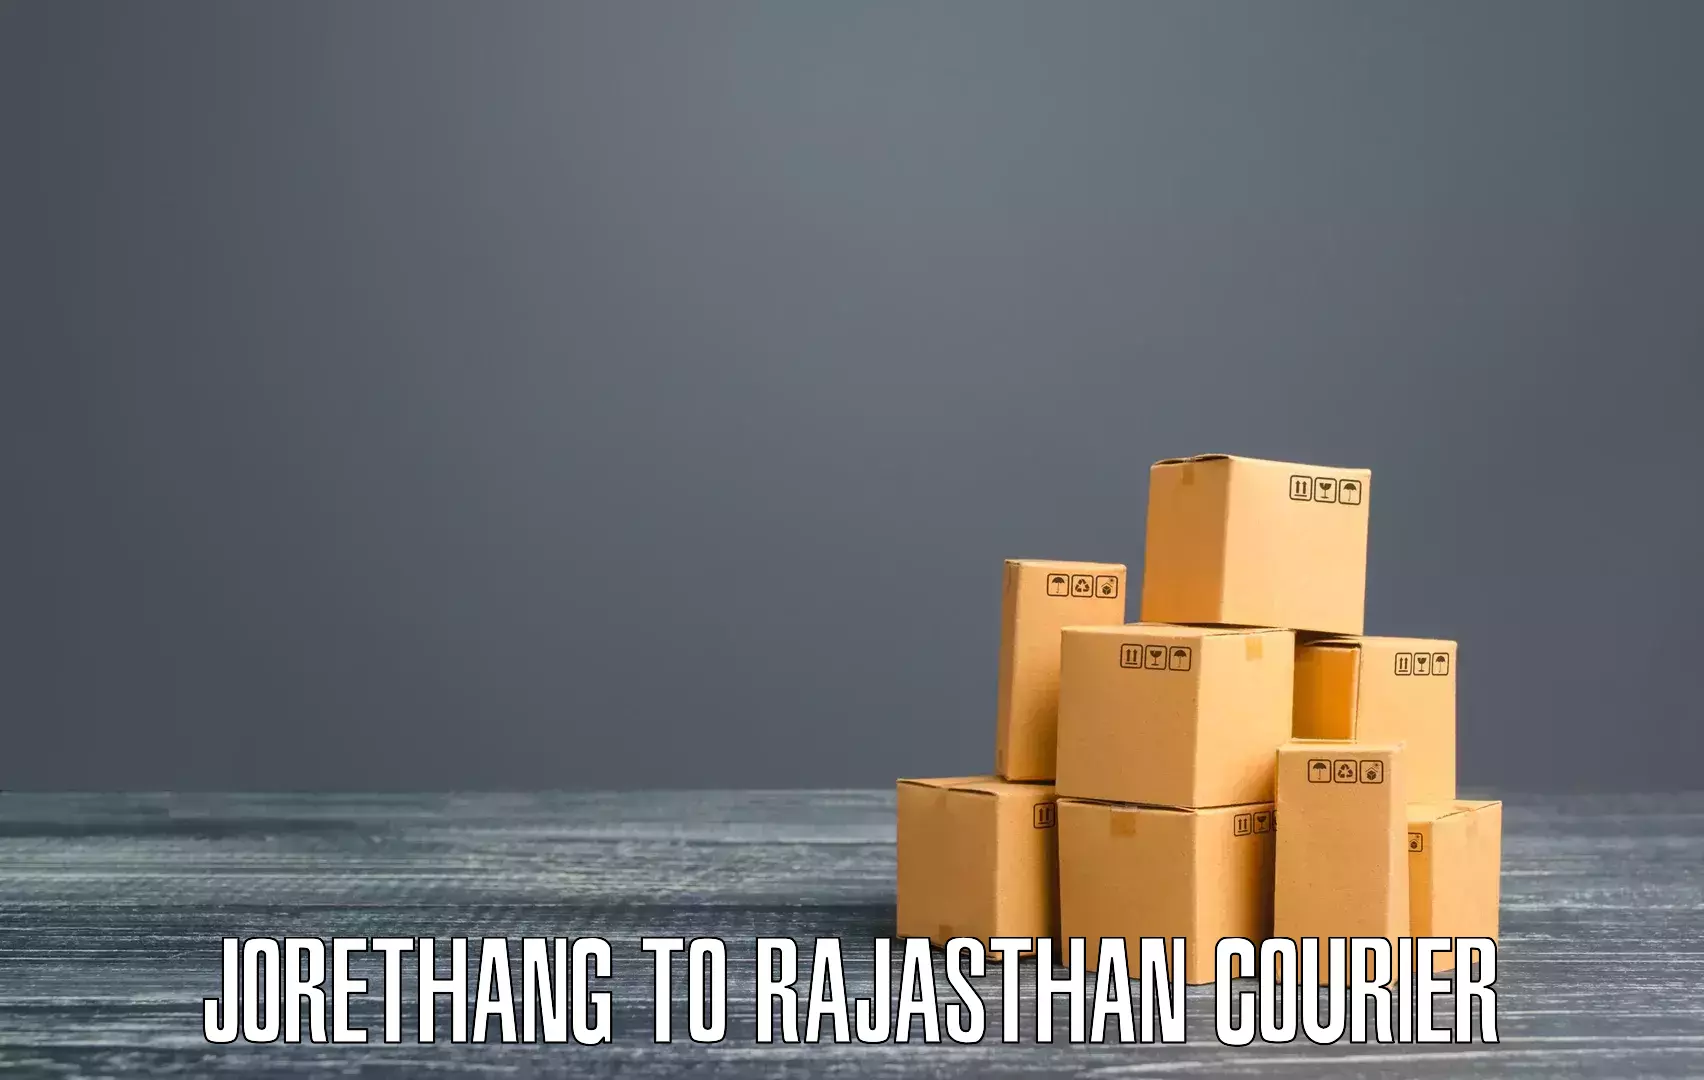 Easy access courier services Jorethang to Rajasthan